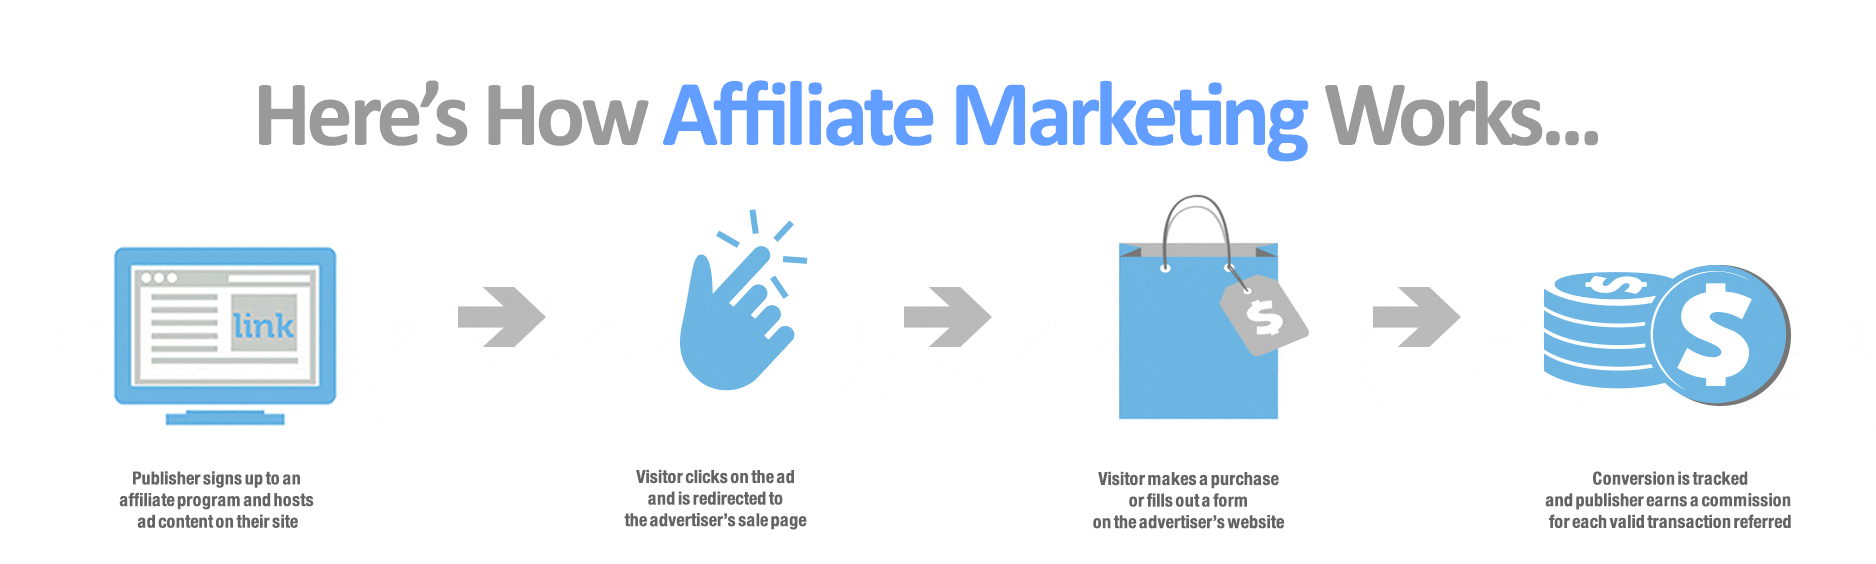 20 Companies with the Highest-Paying Affiliate Programs - SocialBee